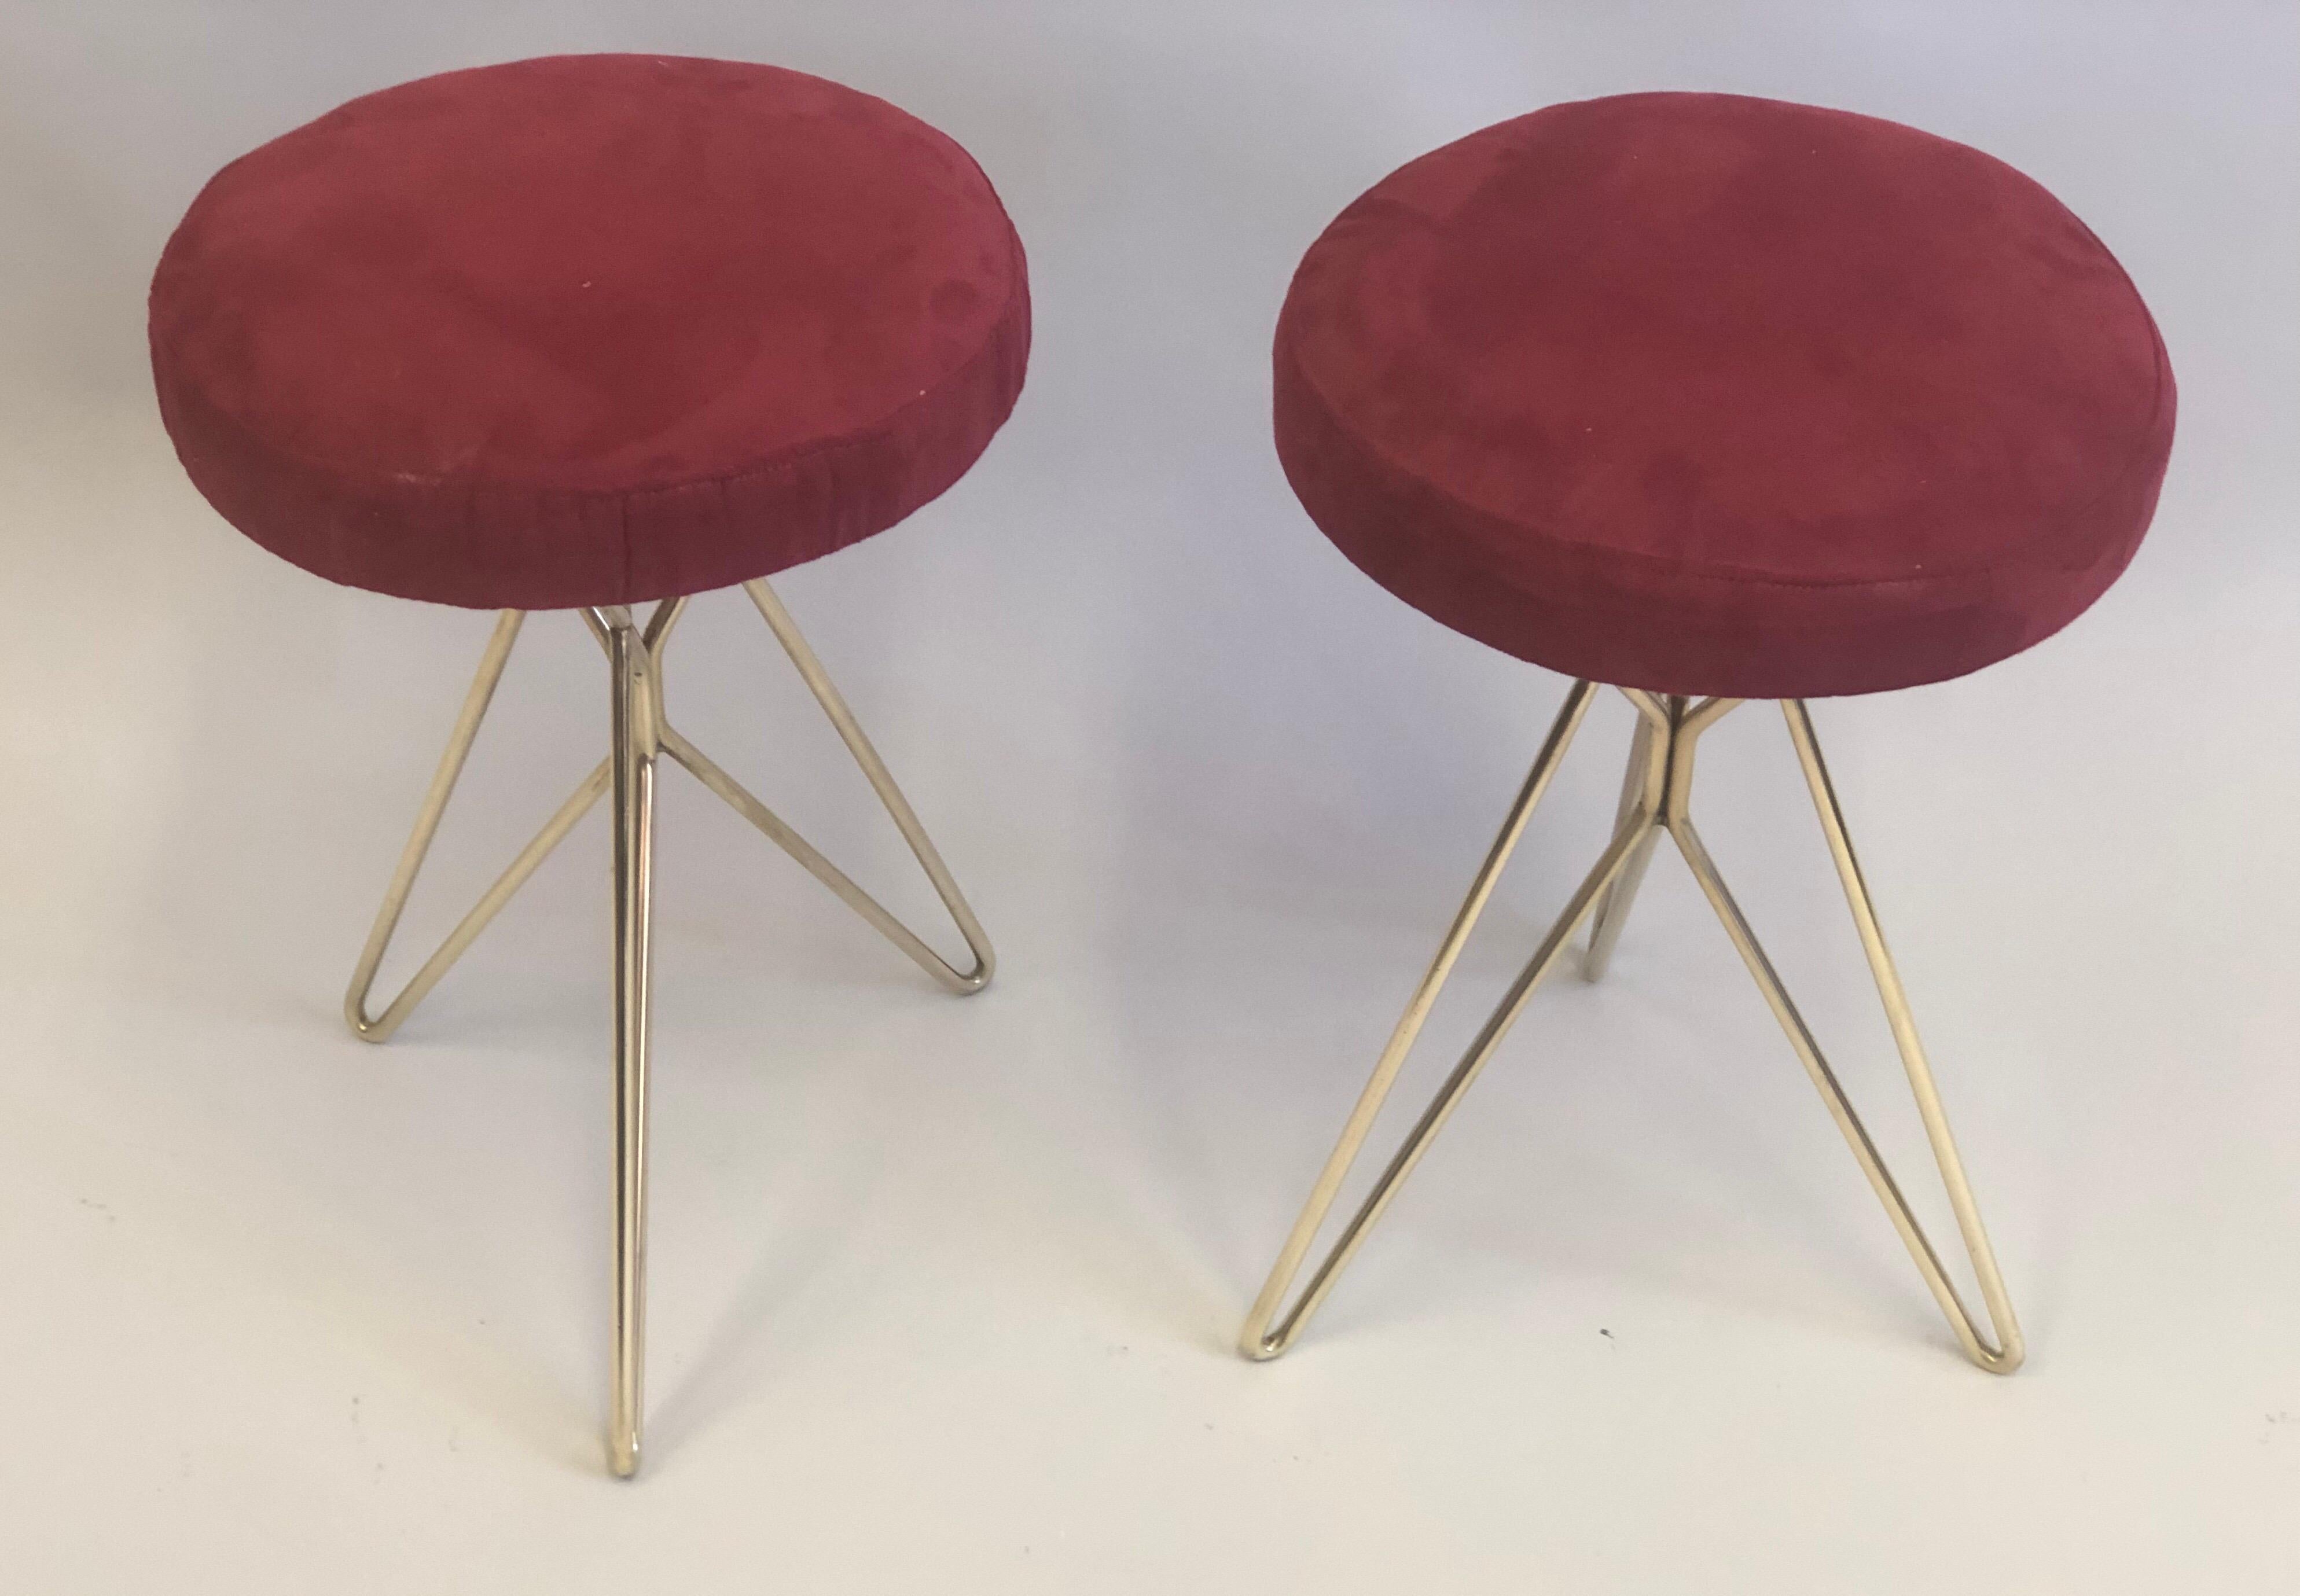 20th Century Pair of Italian Midcentury Brass Stools Attributed to Ico Parisi, 1952 For Sale